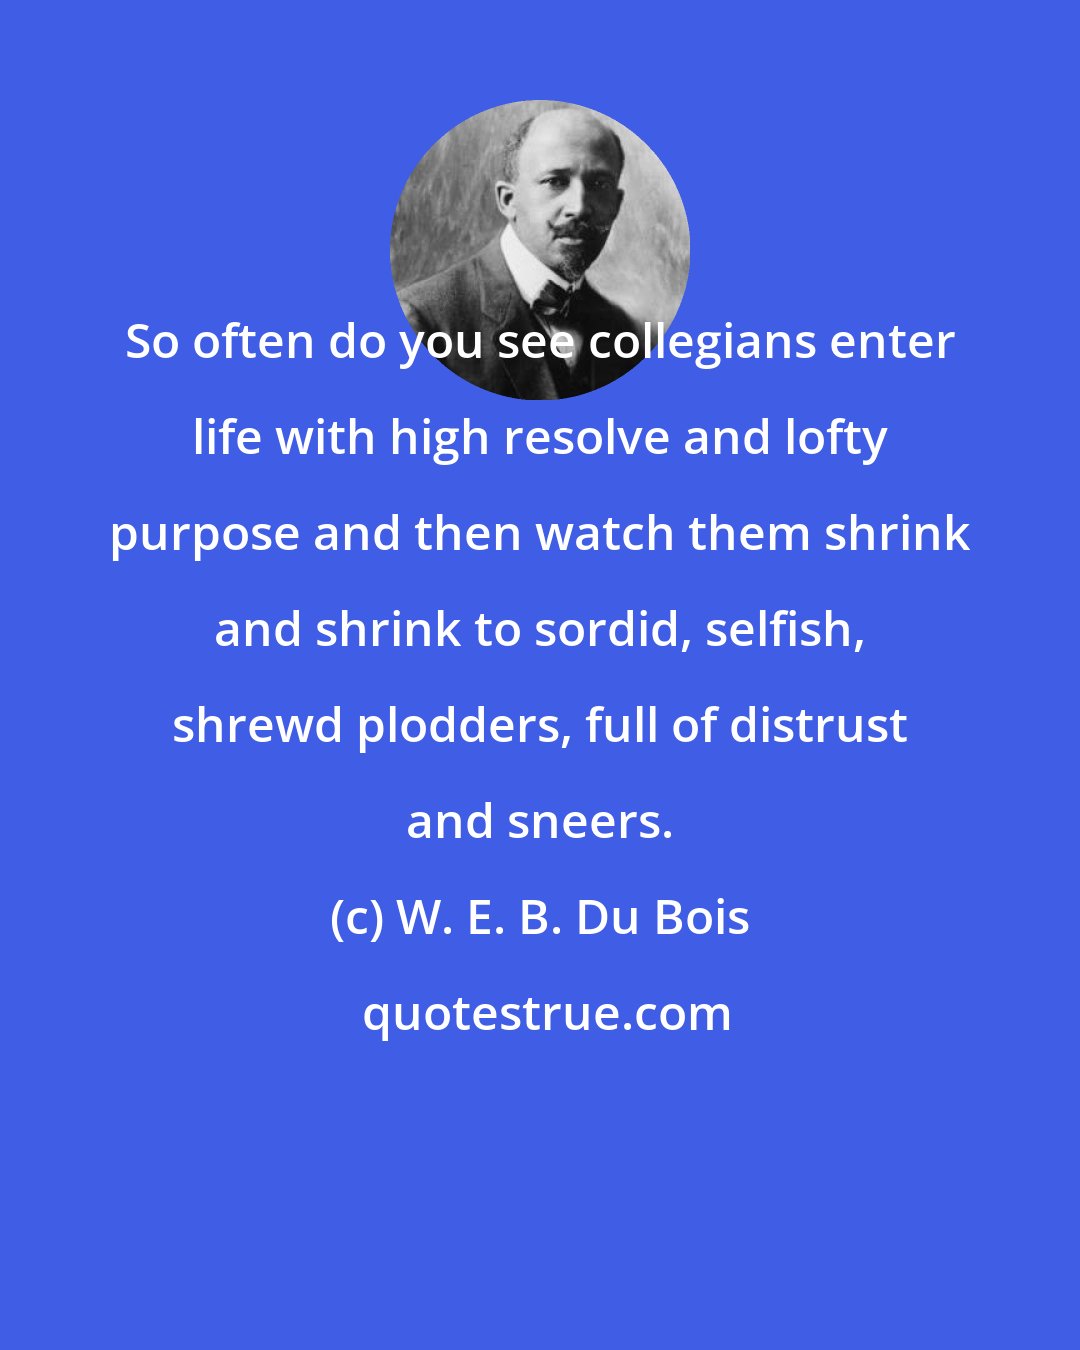 W. E. B. Du Bois: So often do you see collegians enter life with high resolve and lofty purpose and then watch them shrink and shrink to sordid, selfish, shrewd plodders, full of distrust and sneers.